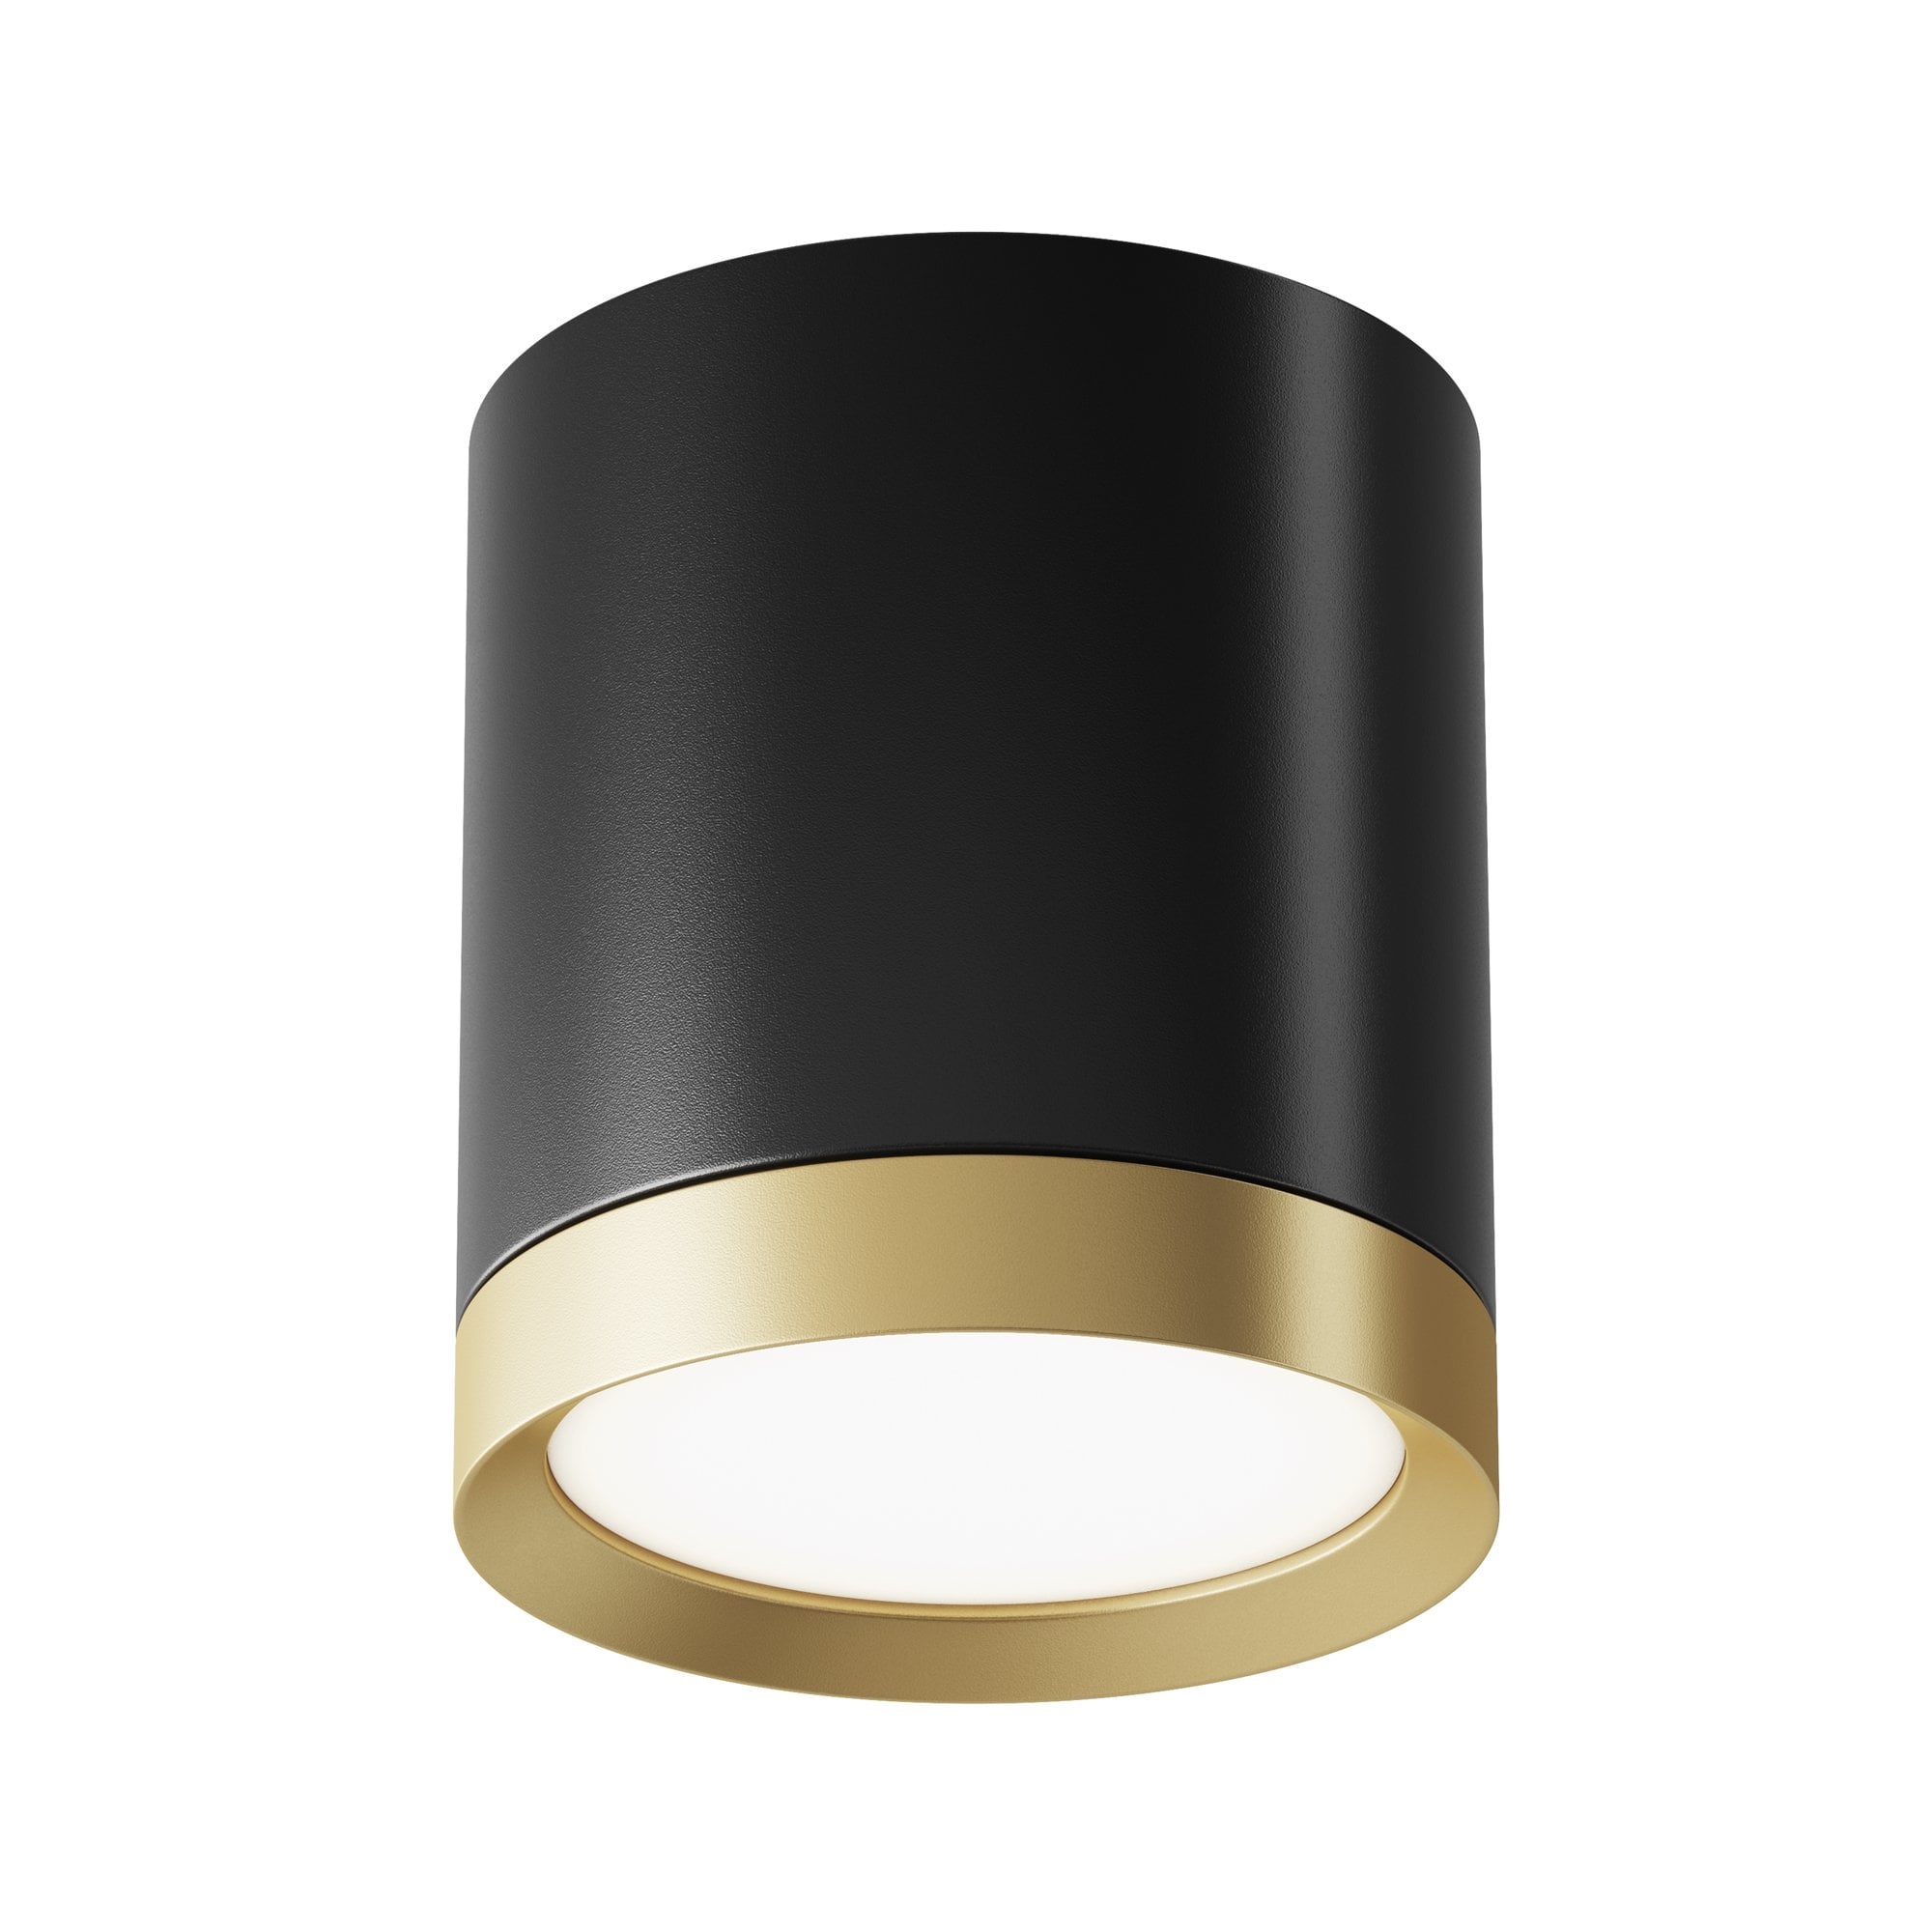 Ceiling & Wall Hoop Ceiling Lamp - Black with Gold